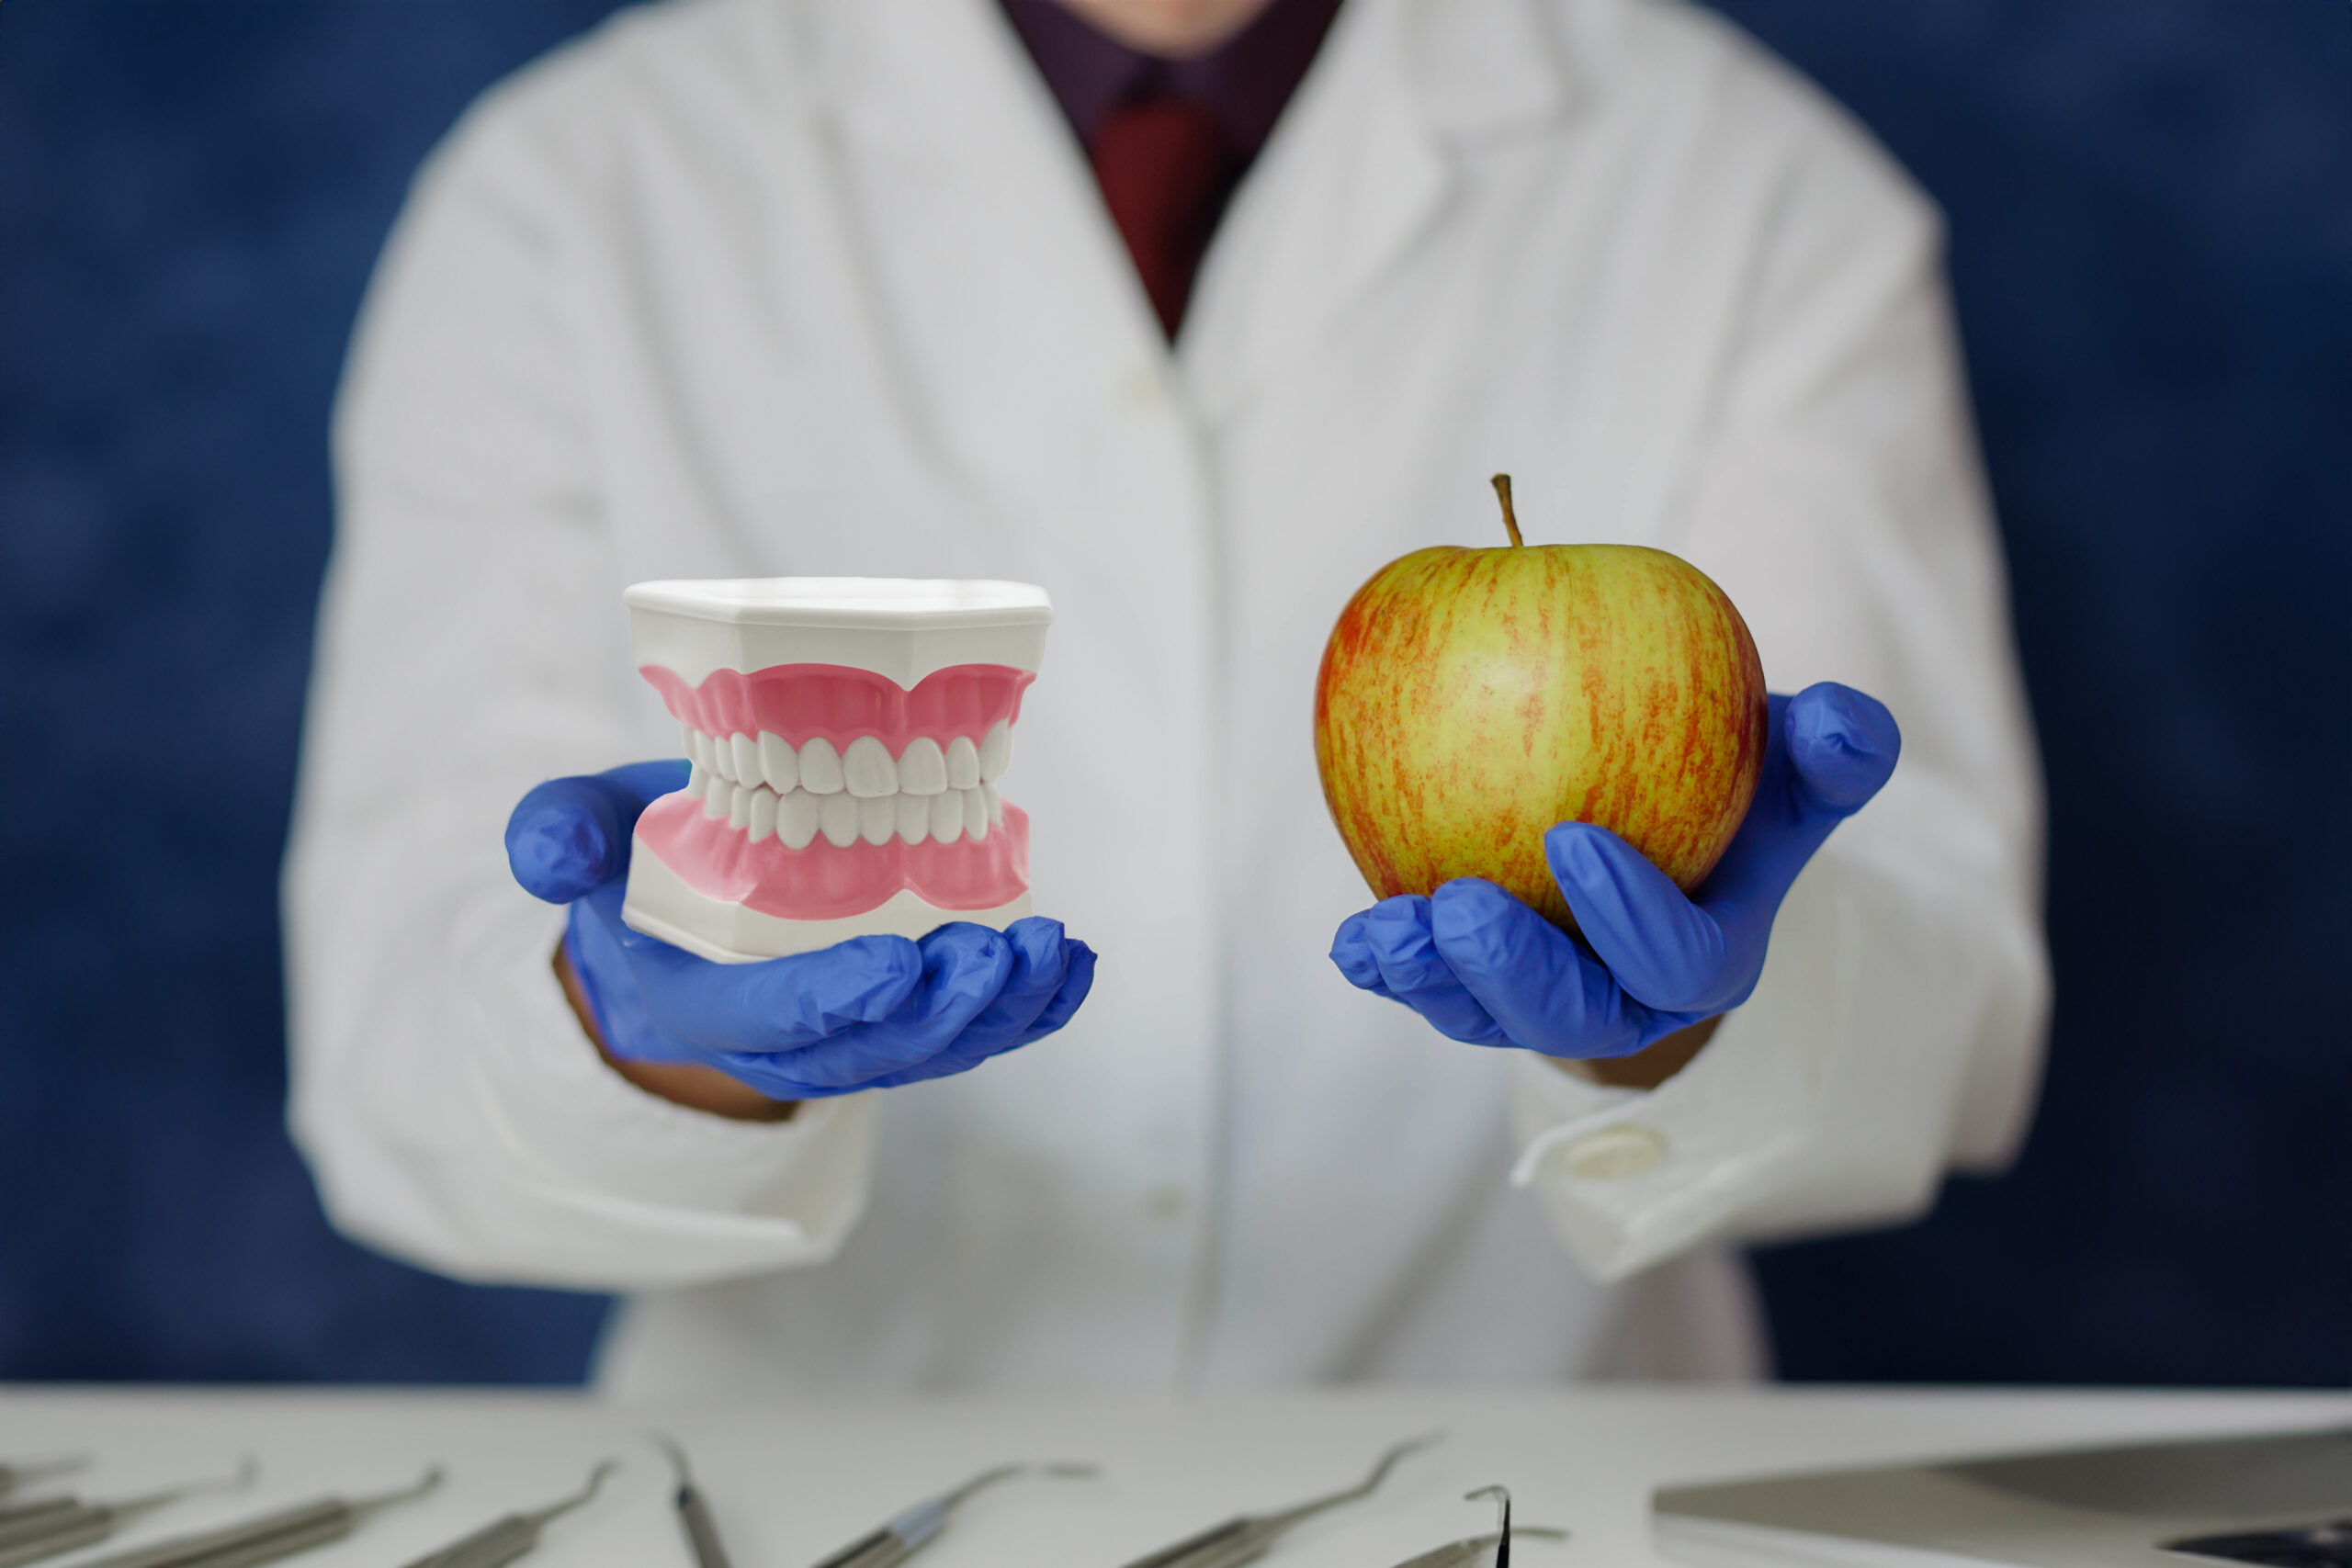 Hands of dentist showing apple and jaw teeth model for instruction how to caring healthy teeth for patient. Close up.